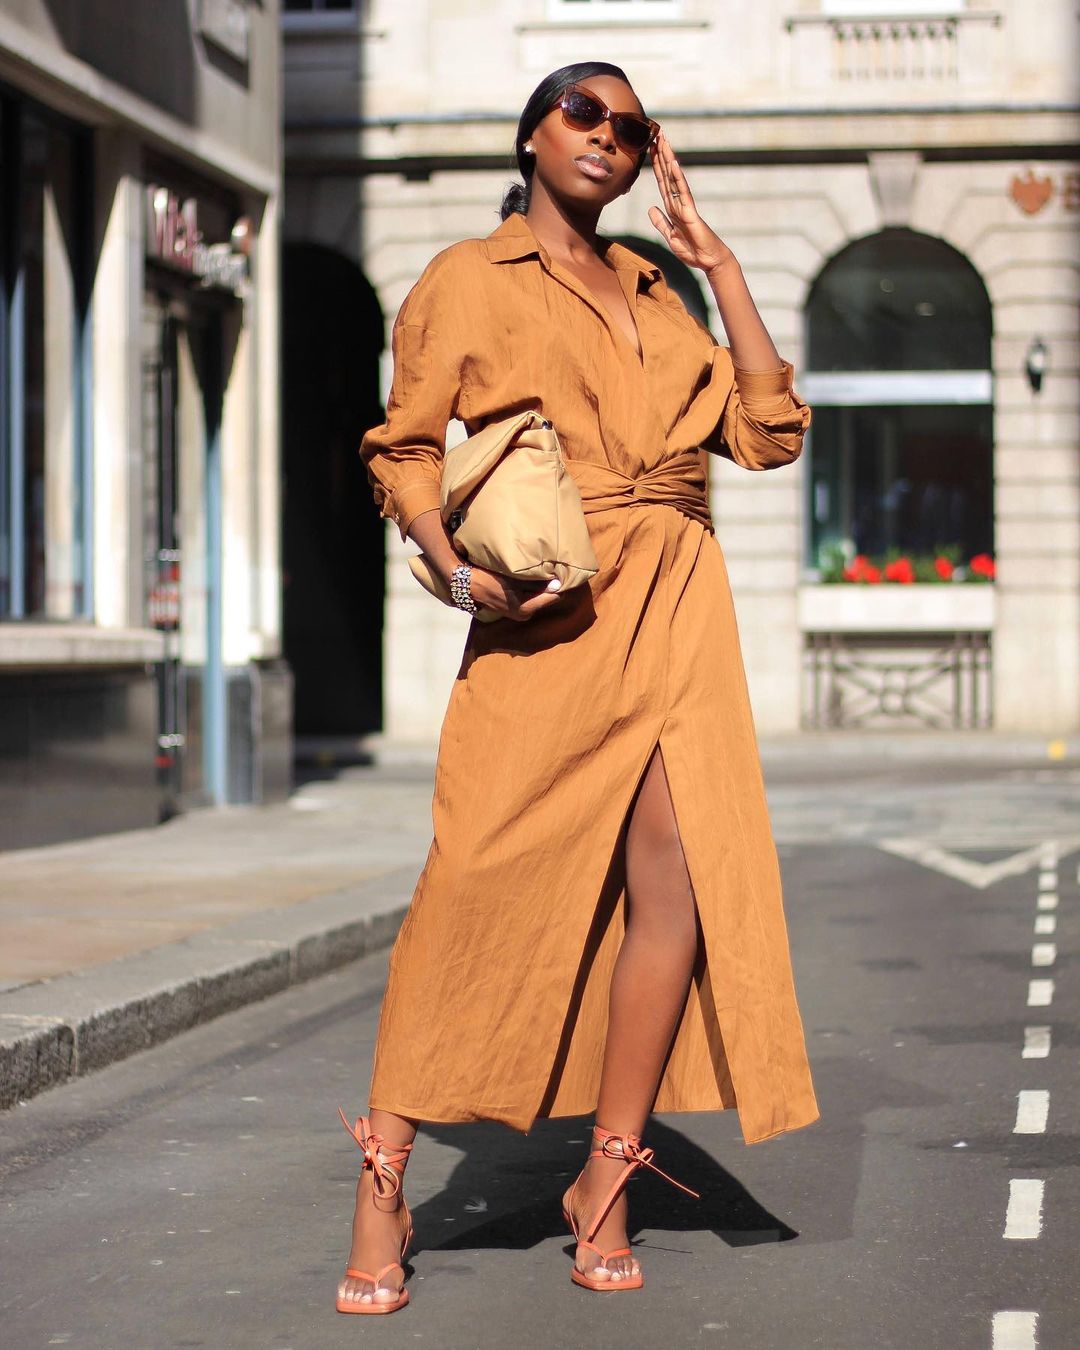 Check Out 25 Ultra Stylish Ways To Style Shirt Dresses in 2022